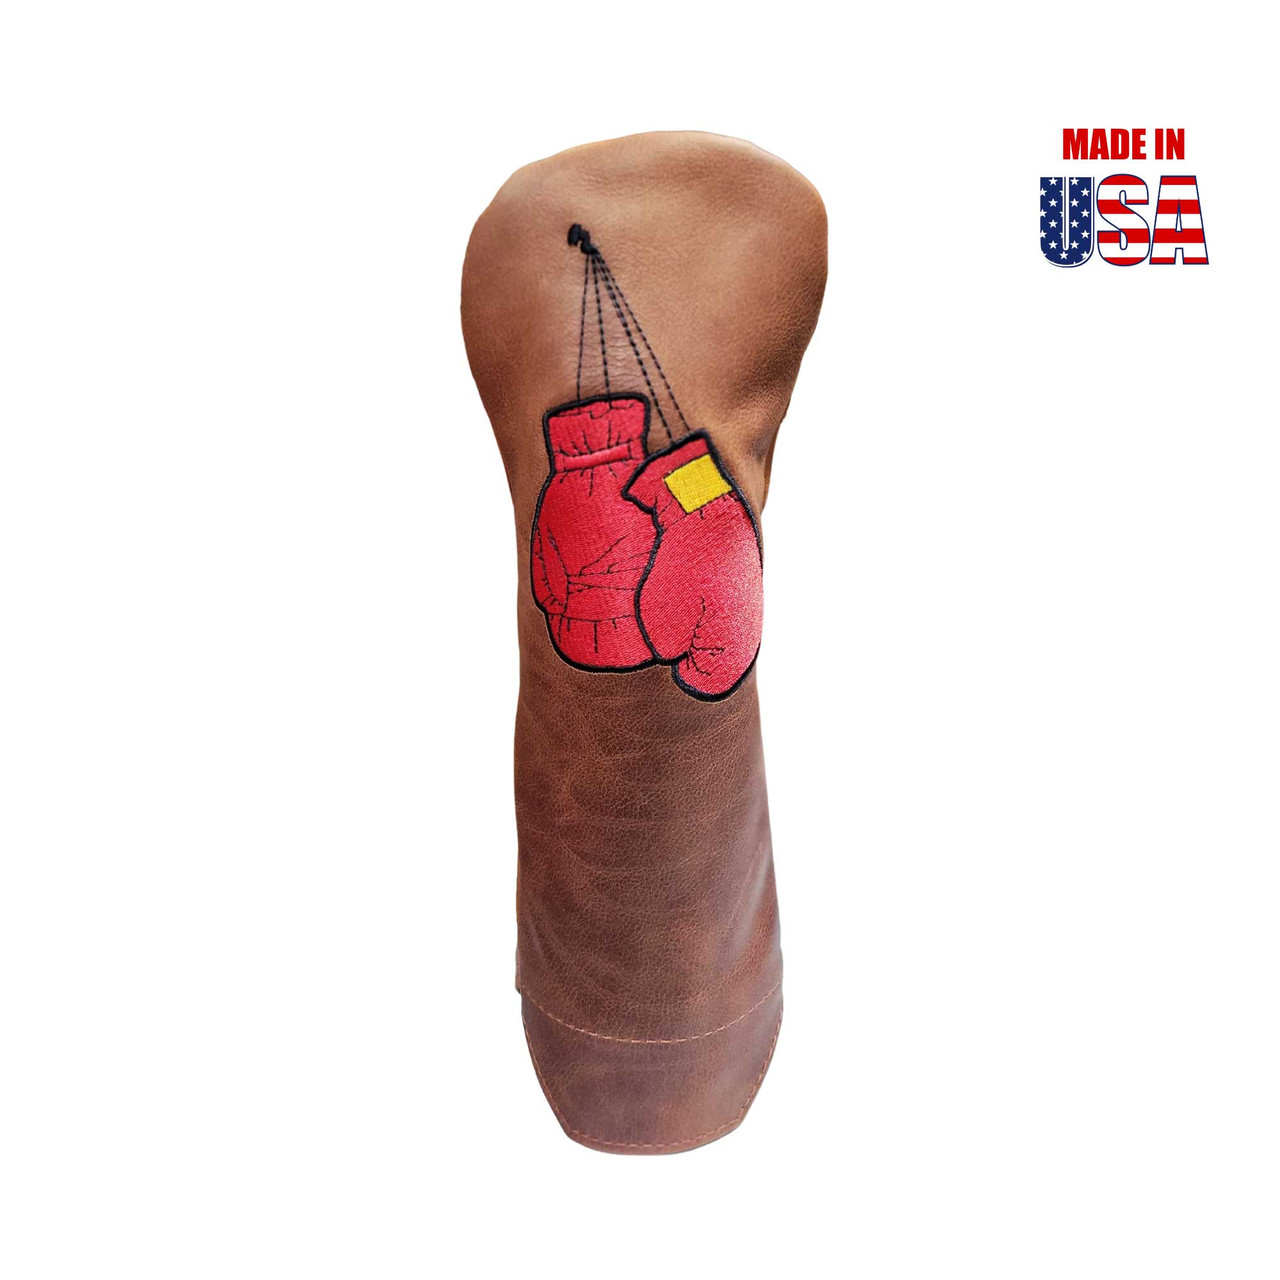 Boxing Gloves Hanging on Leather Fairway Headcover